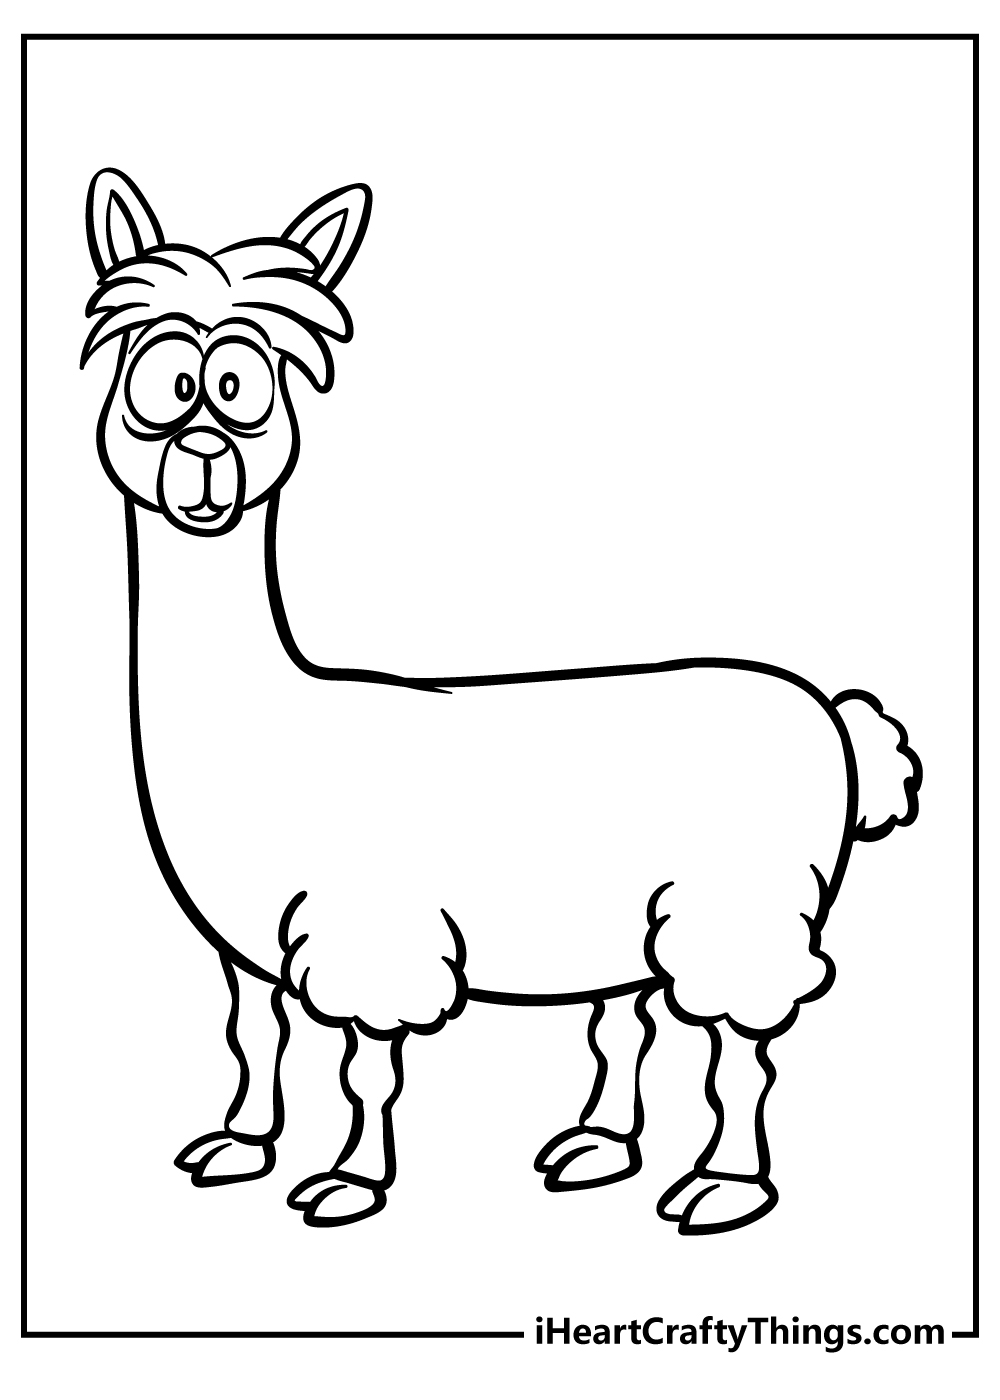 llama Coloring Pages for kids free download